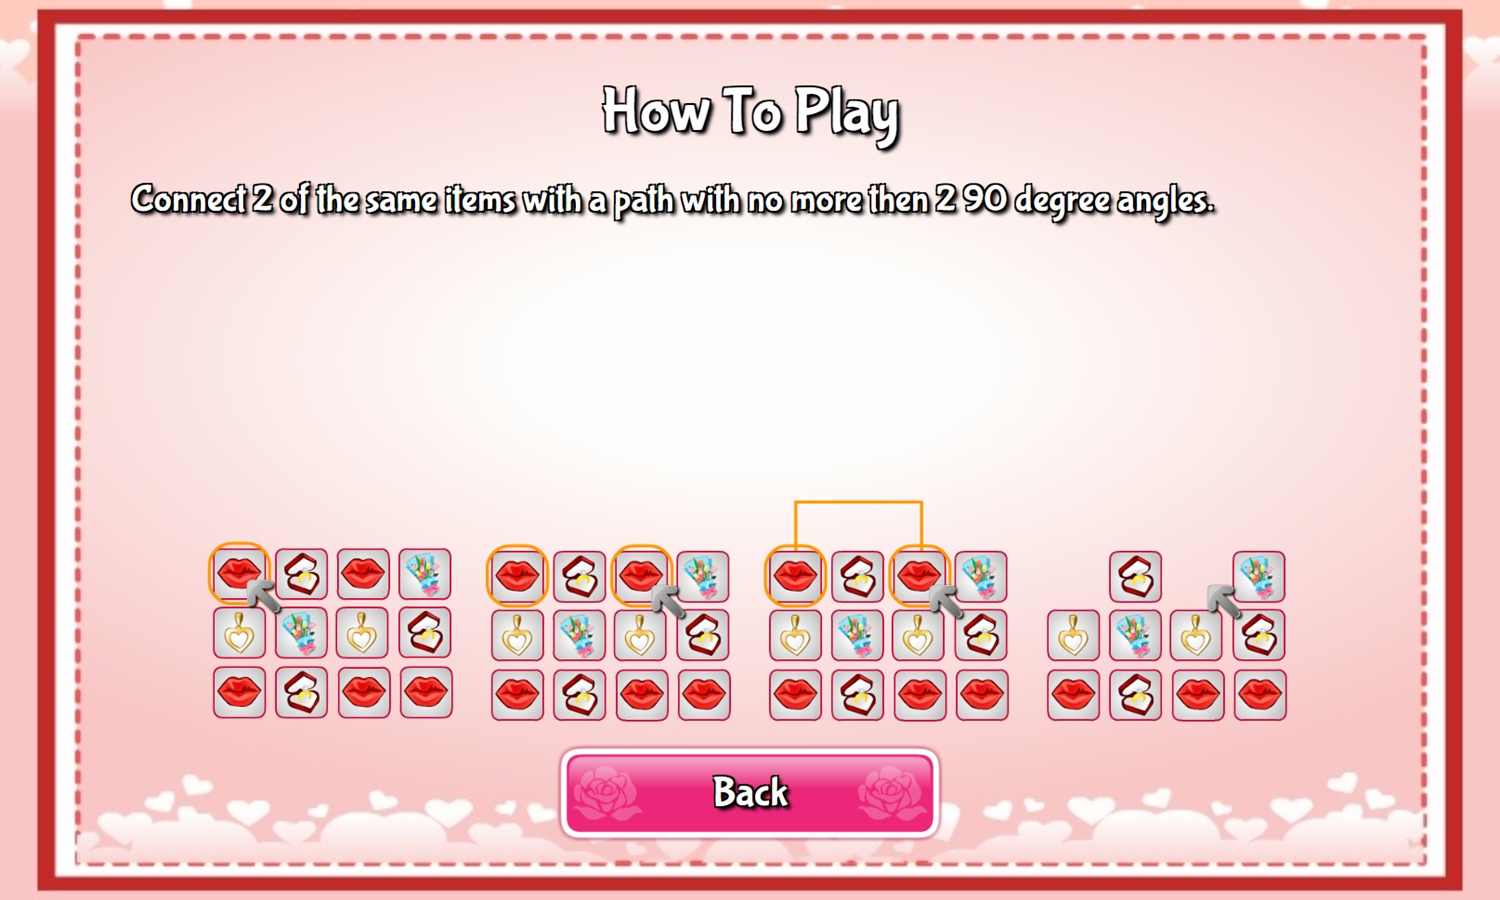 Valentine Link Game How To Play Screenshot.